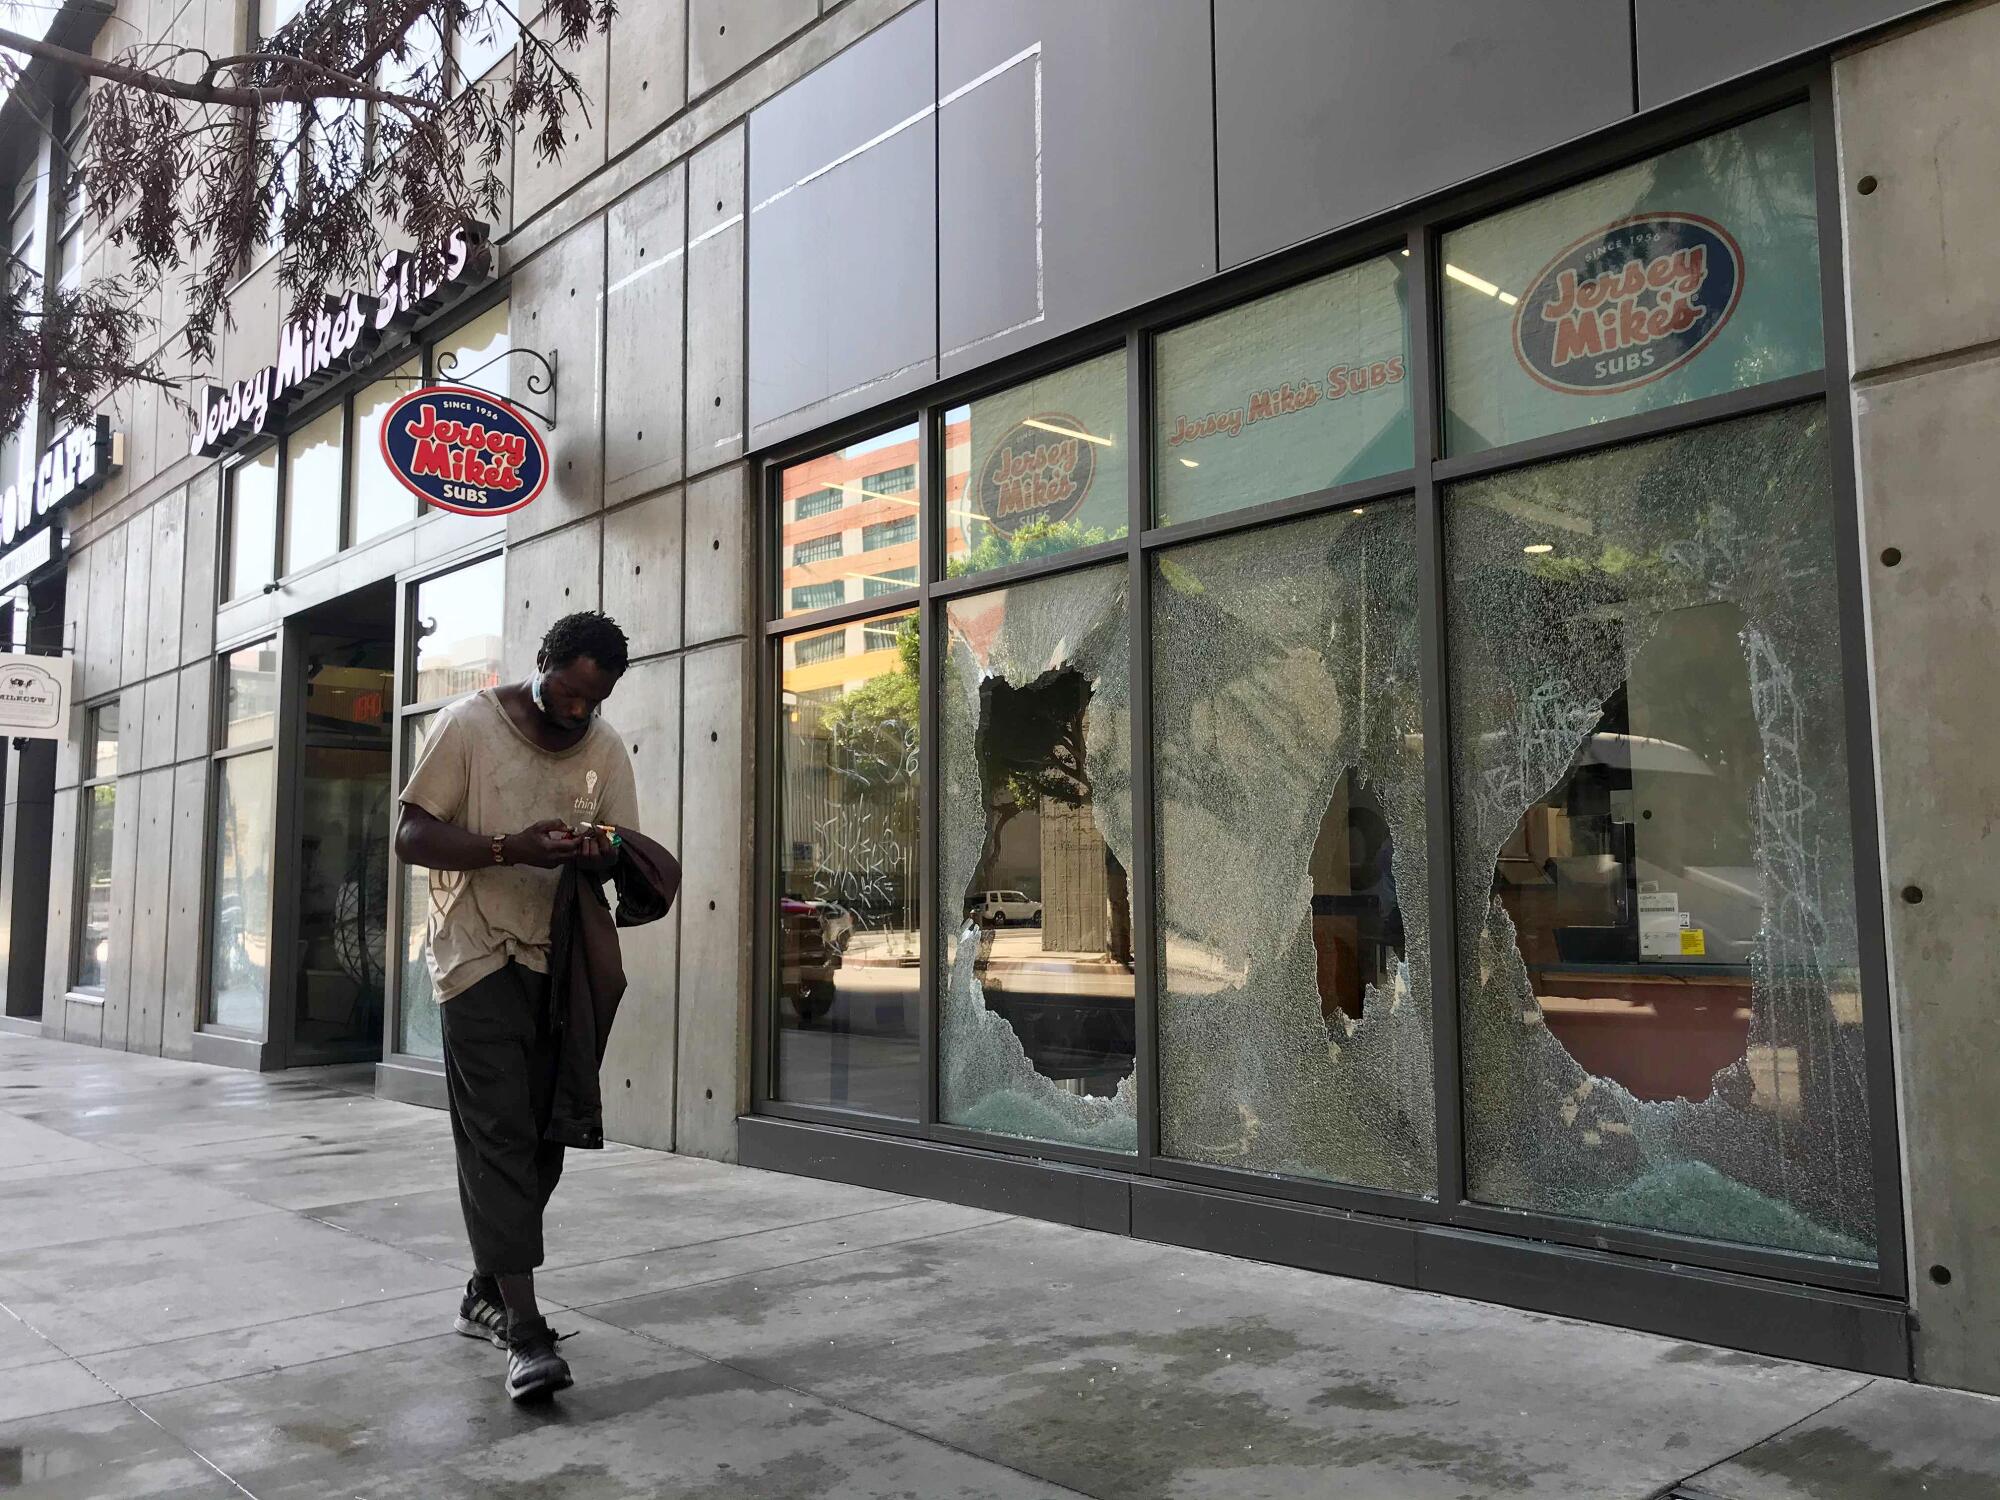 A man walks by broken windows at a Jersey Mike's near Staples Center after Sunday night's Lakers celebration.